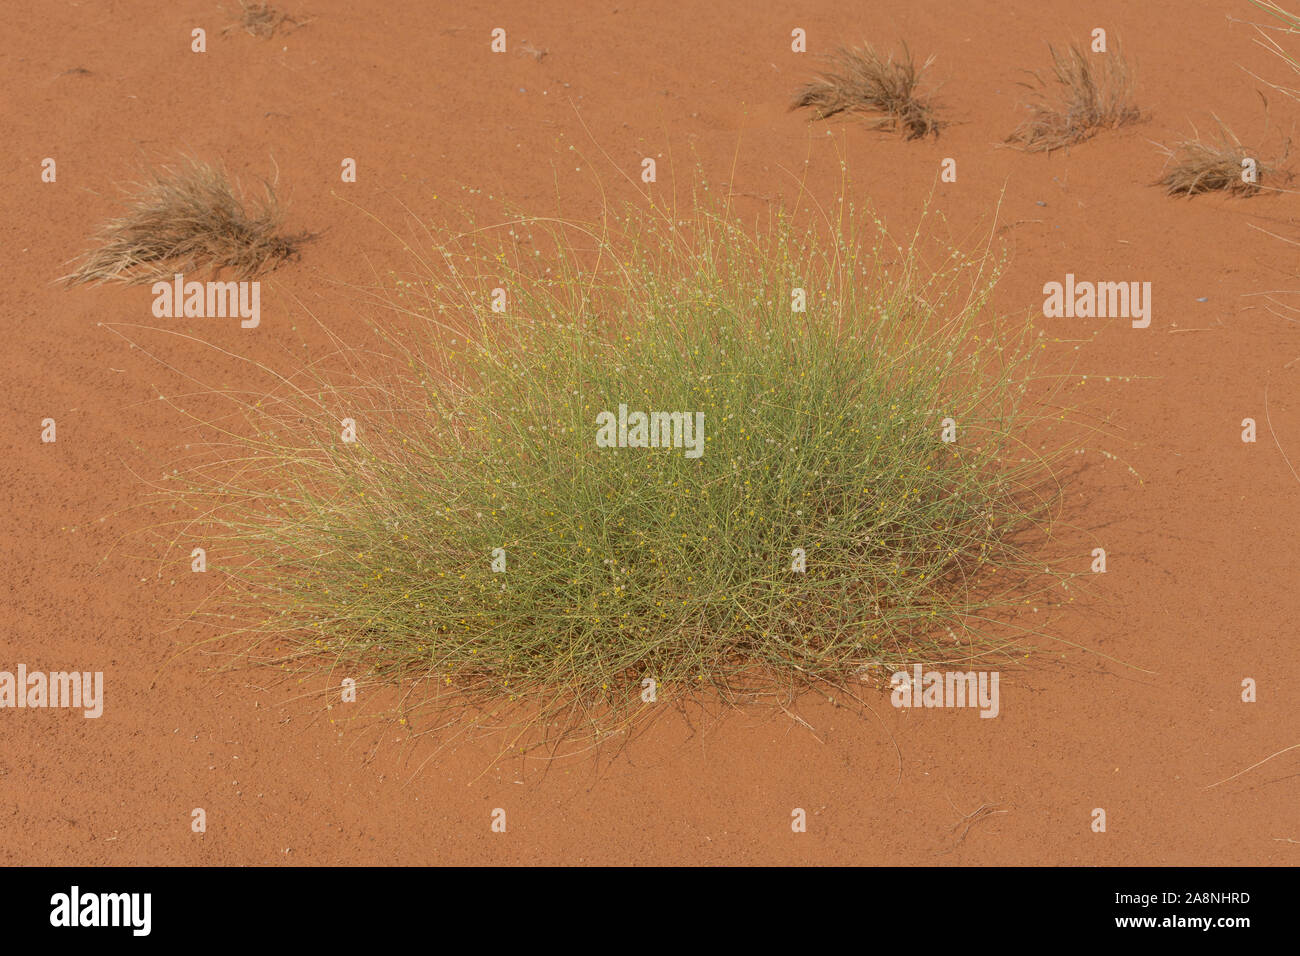 Green resiliant desert grass plants with small yellow flowers sits among the patterned and textured orange sands in the United Arab Emirates. Stock Photo